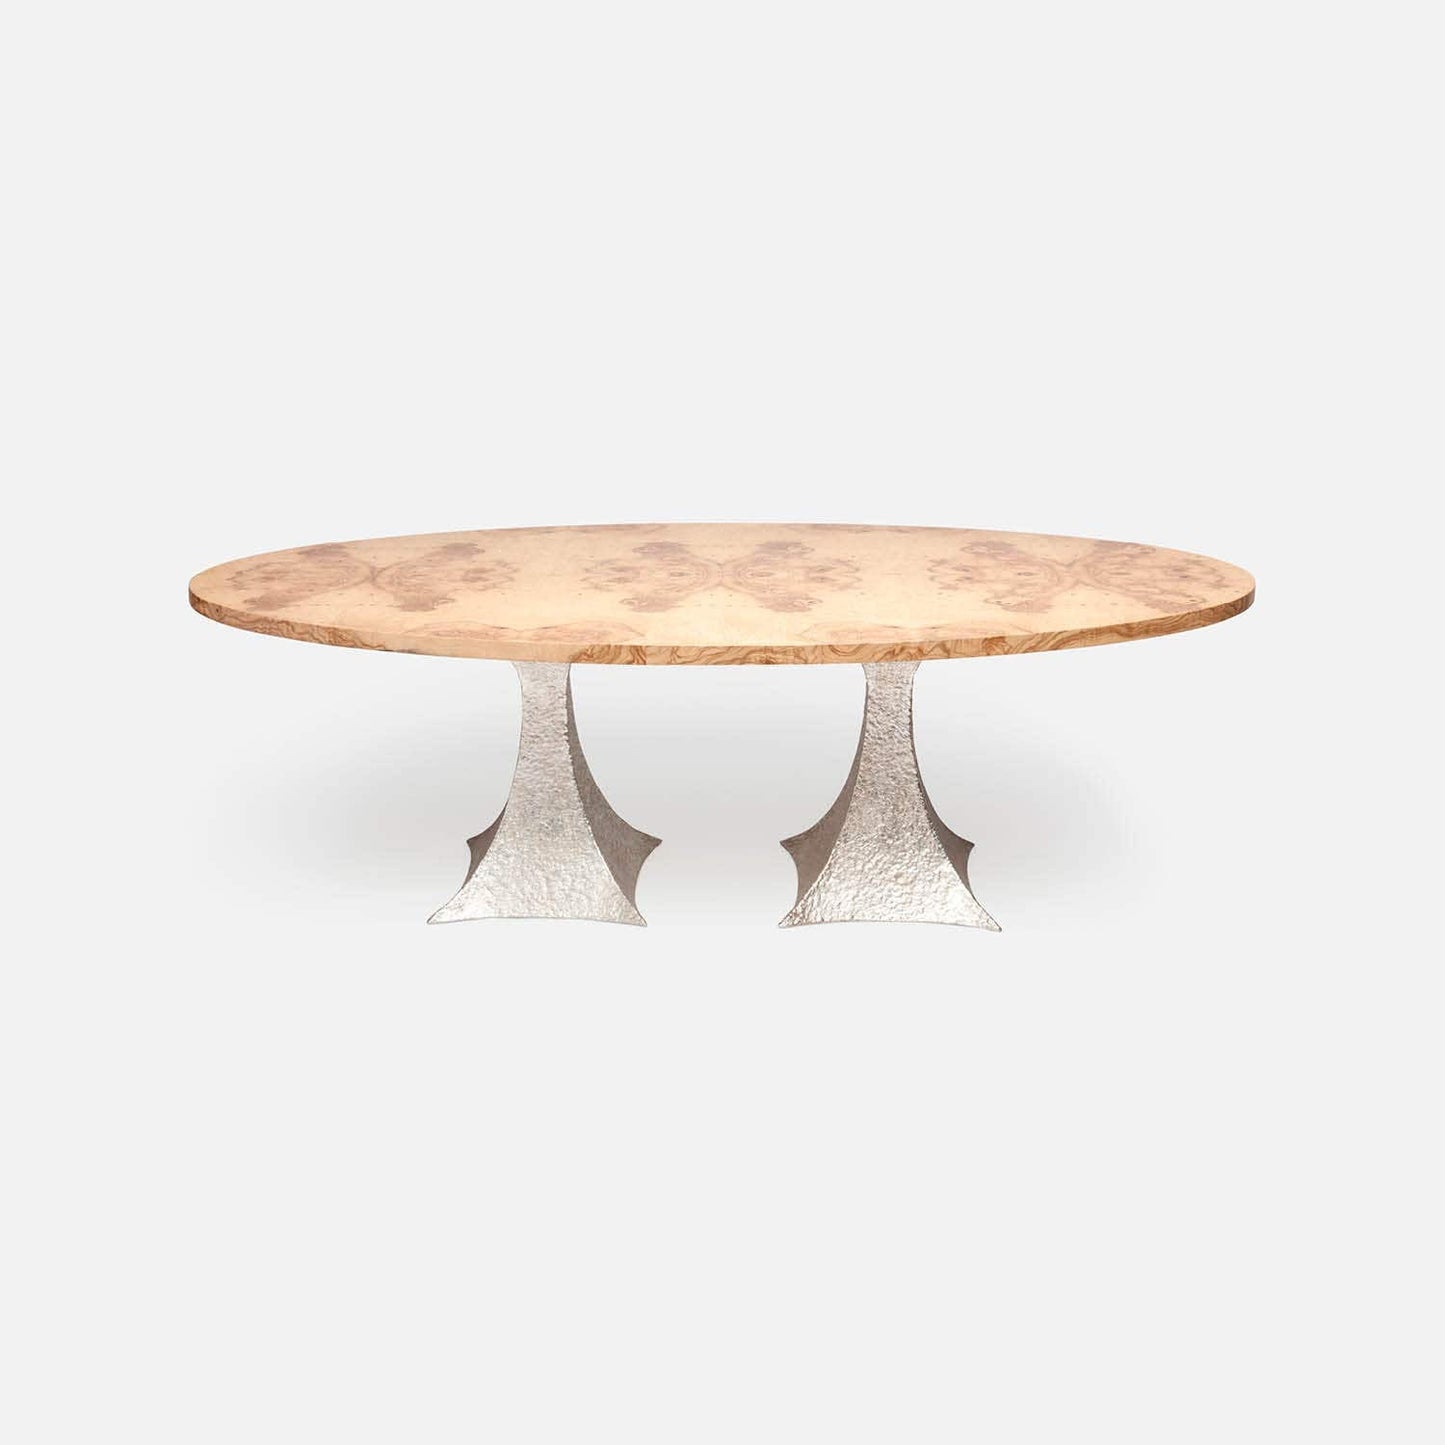 Made Goods Noor 84" x 42" x 30" Double Base Bumpy Cool Silver Iron Dinning Table With Oval Olive Ash Veneer Table Top